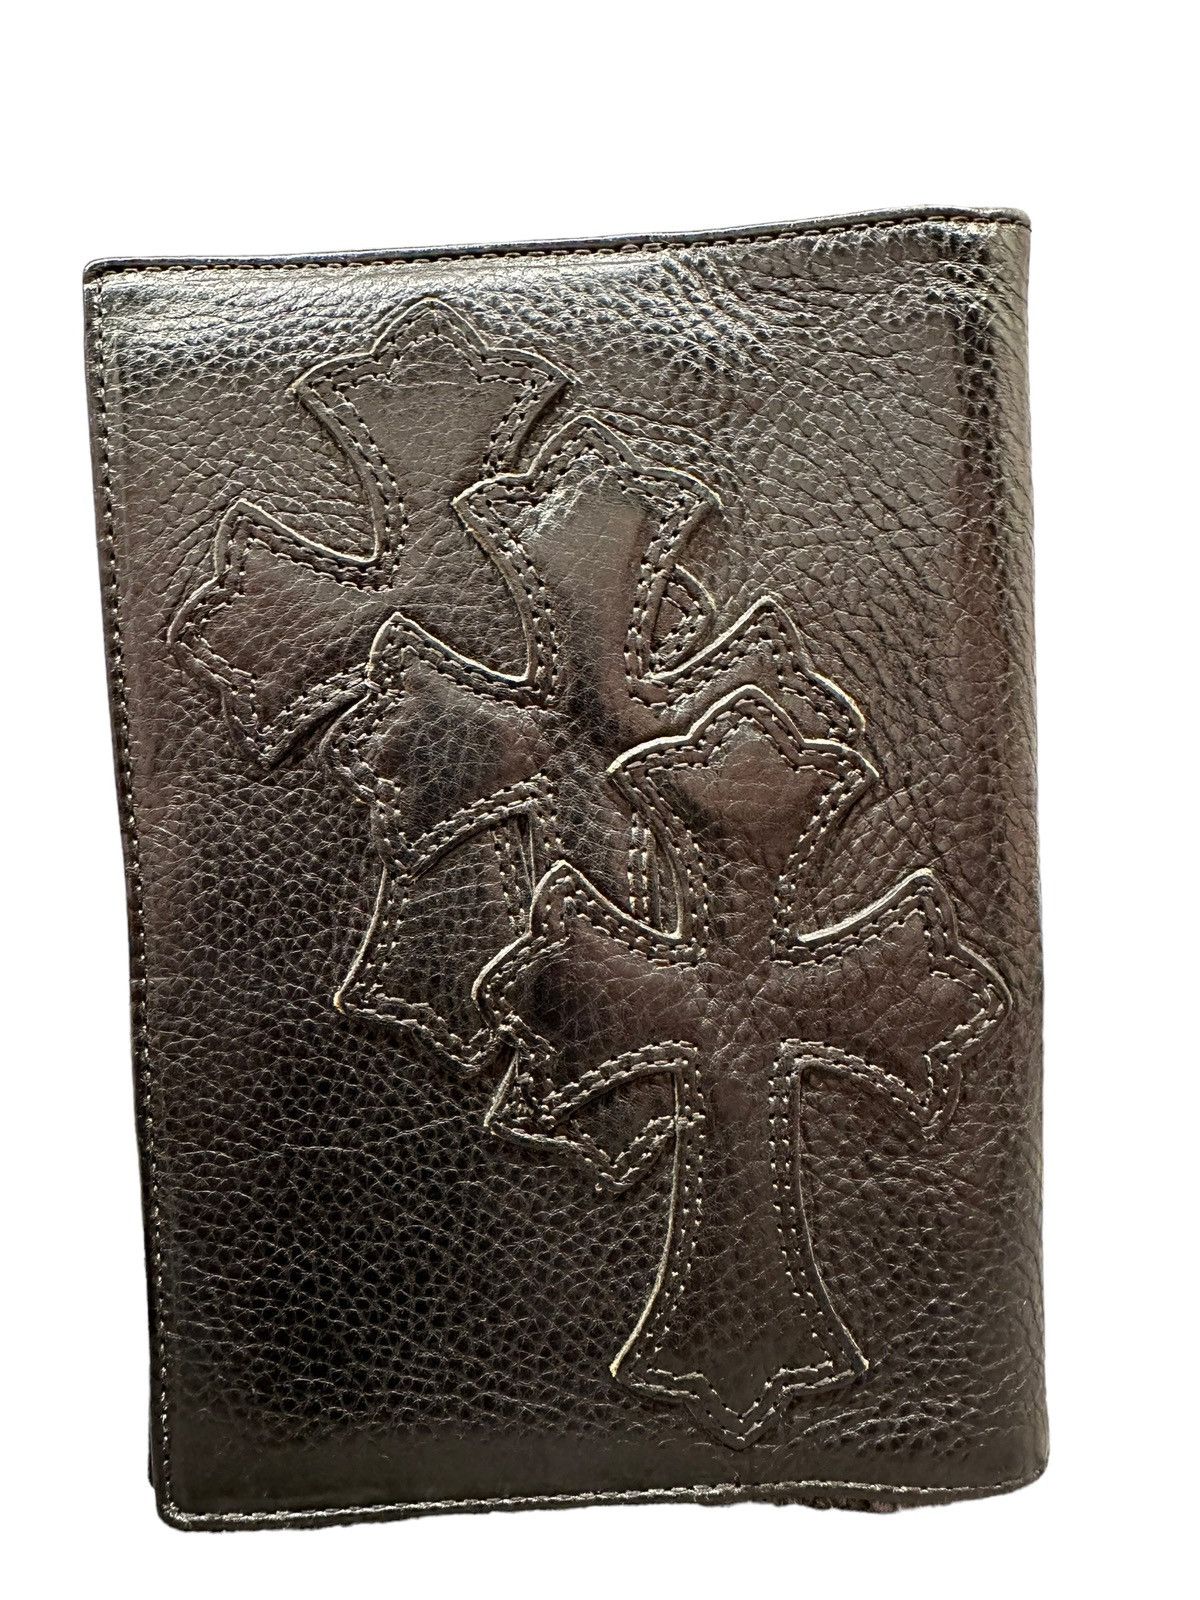 Chrome Hearts CHROME HEARTS LEATHER ZIP WALLET | Grailed